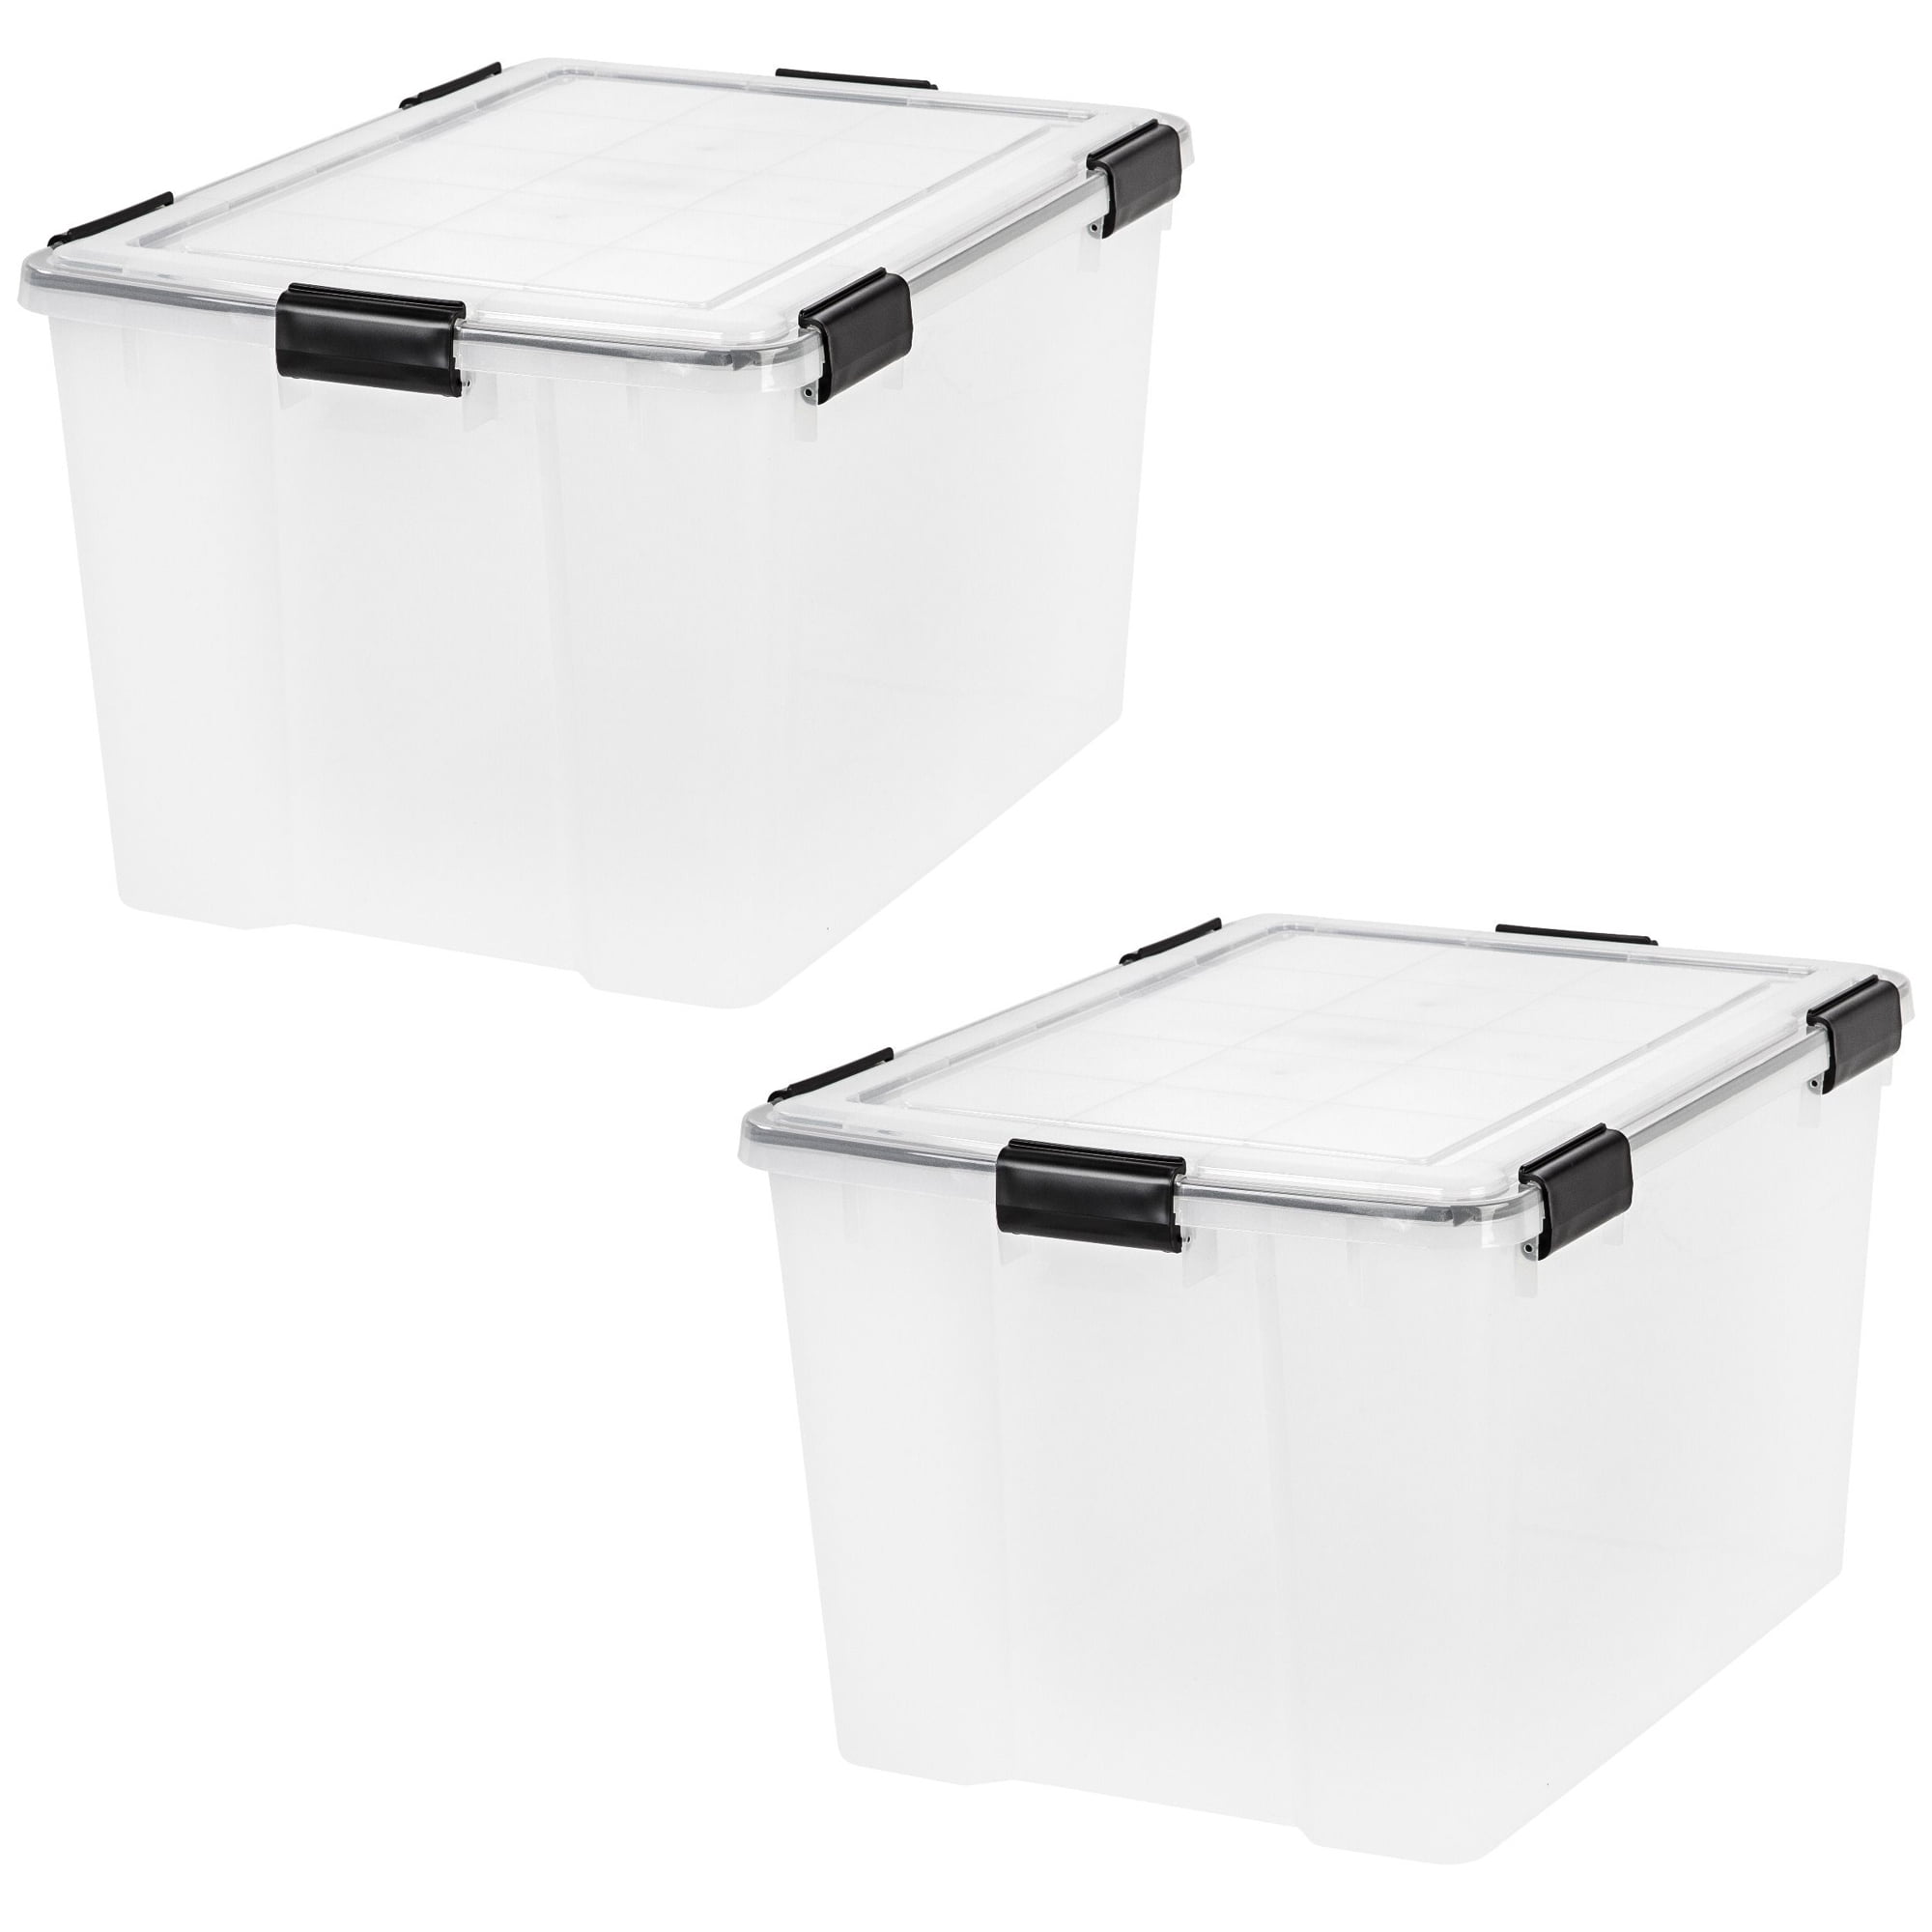 IRIS USA 33Qt. 3 Pack Holiday Wreath Storage Container Box with